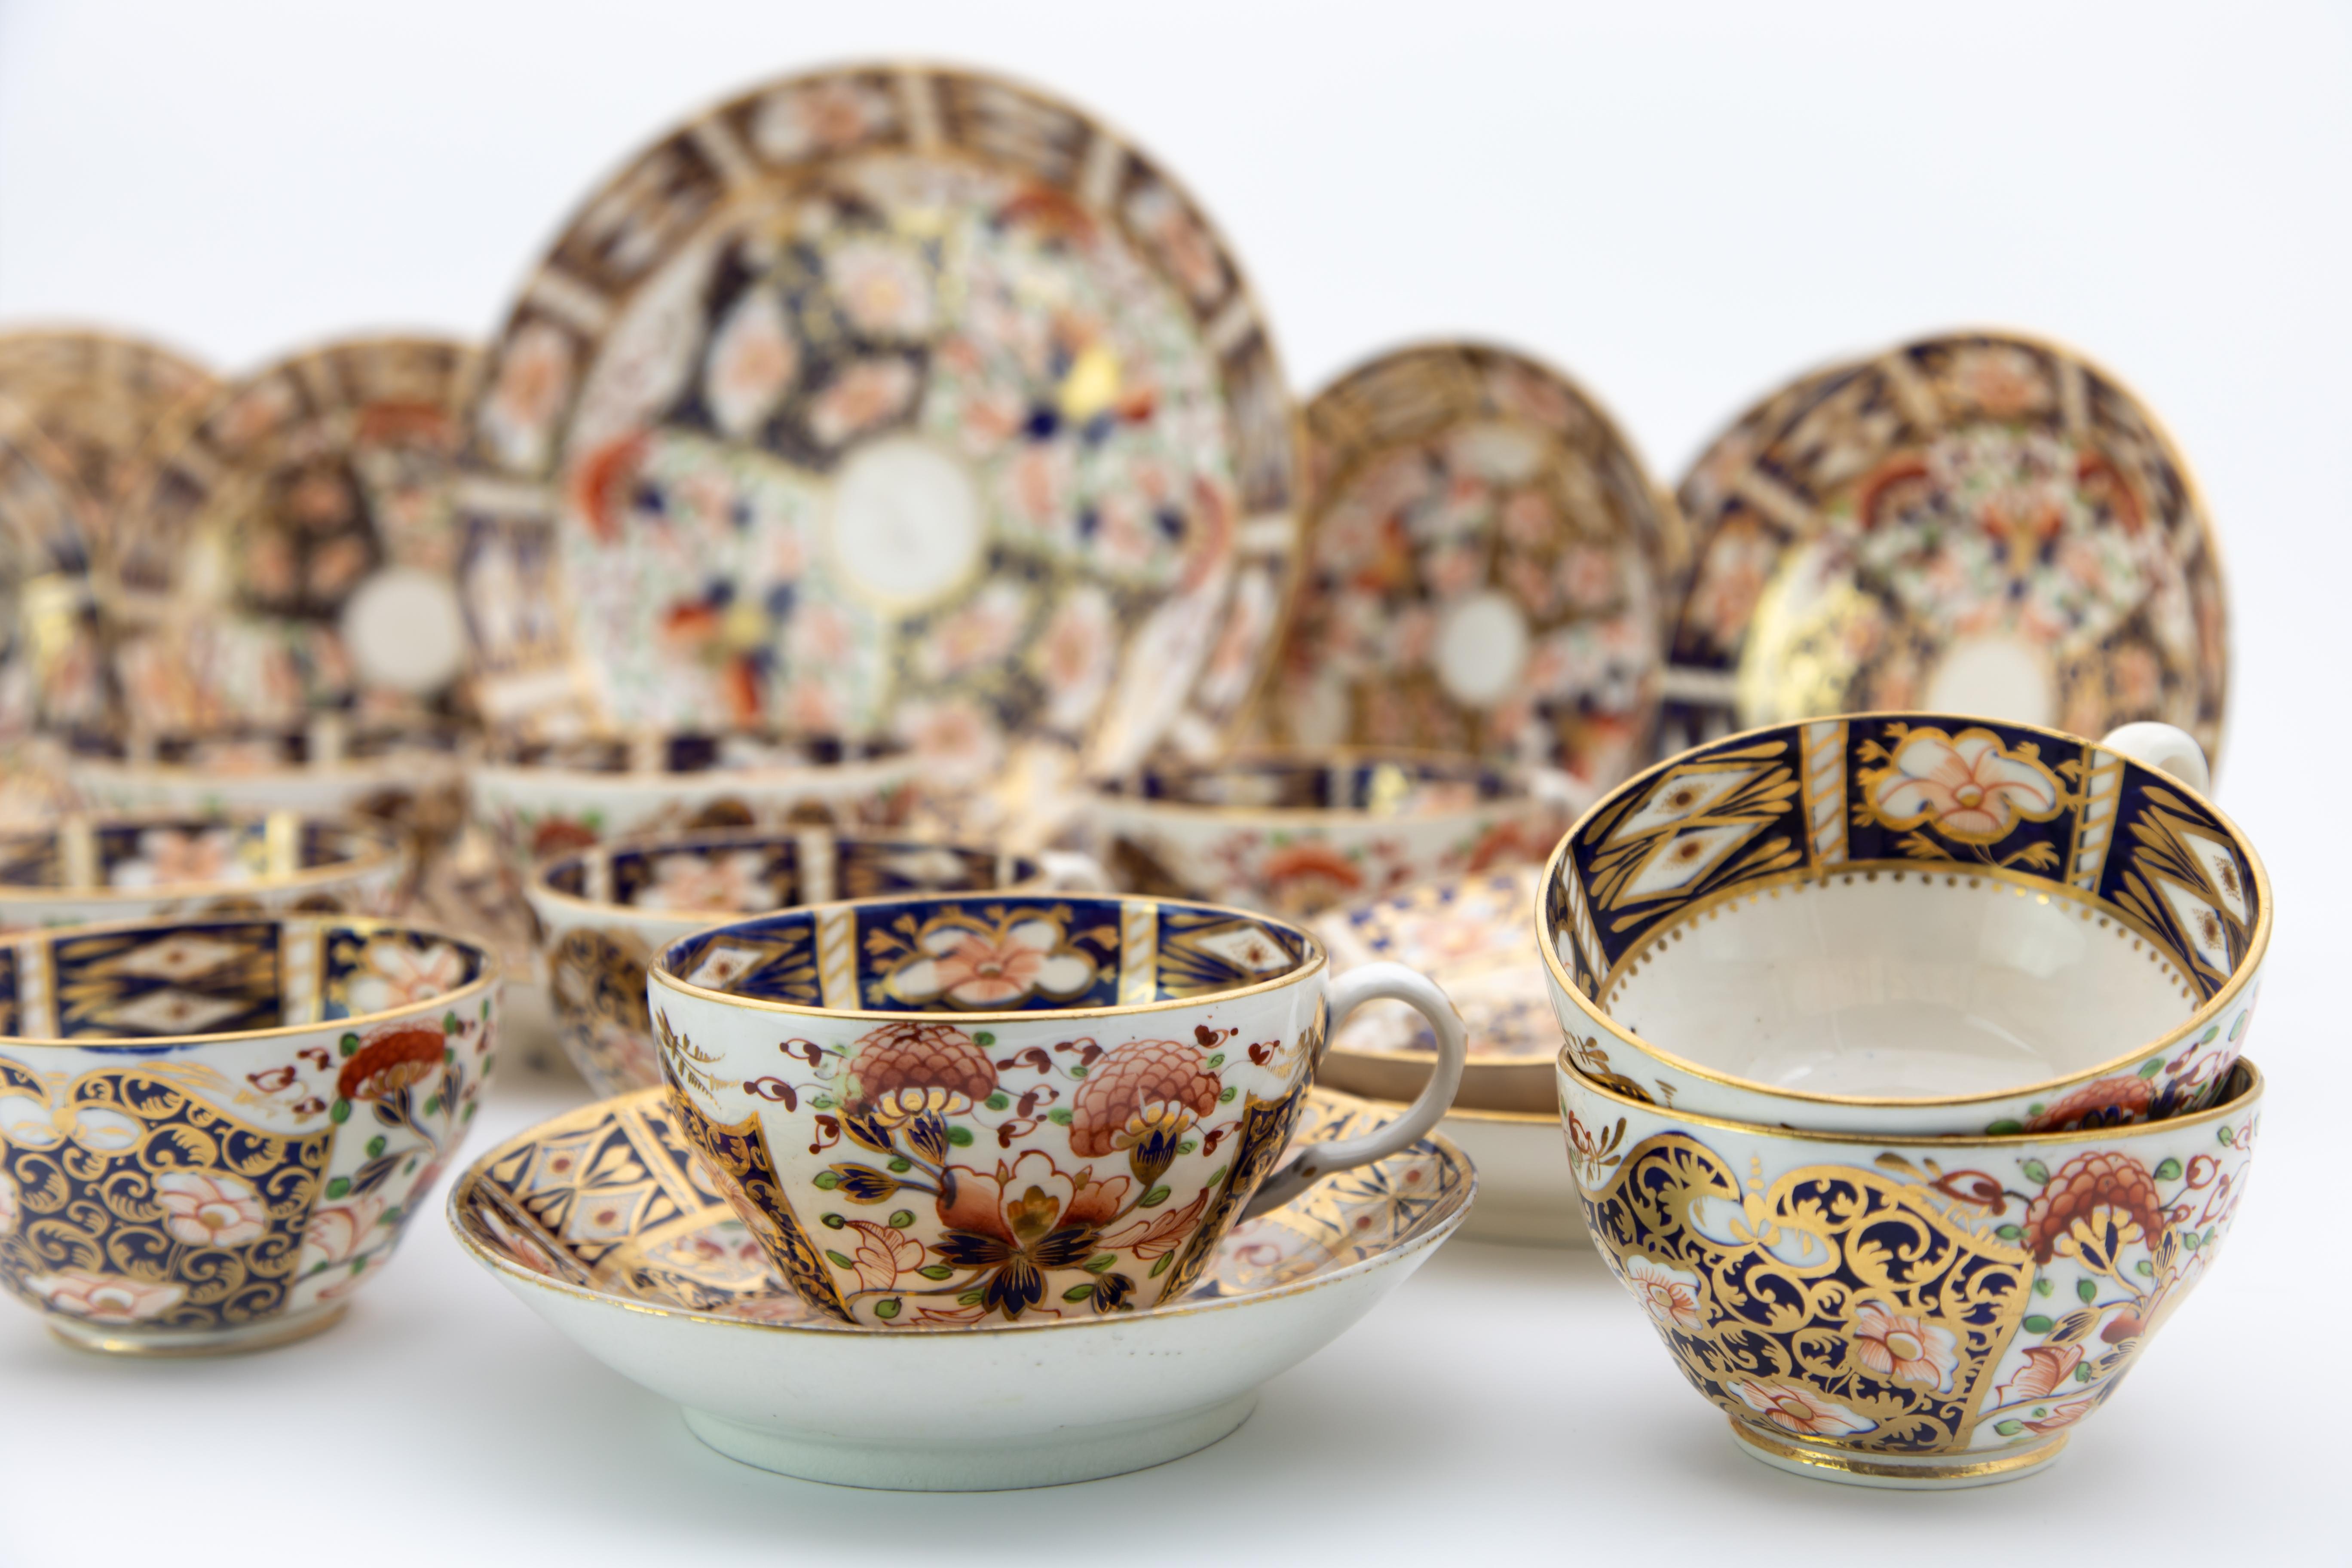 A Regency-style Derby Imari partial tea service comprising 12 teacups and saucers and one dish.

Imari ware originates in late 17th-century Japan, when craftsmen around Arita created brightly colored, highly gilded export porcelain to cater to